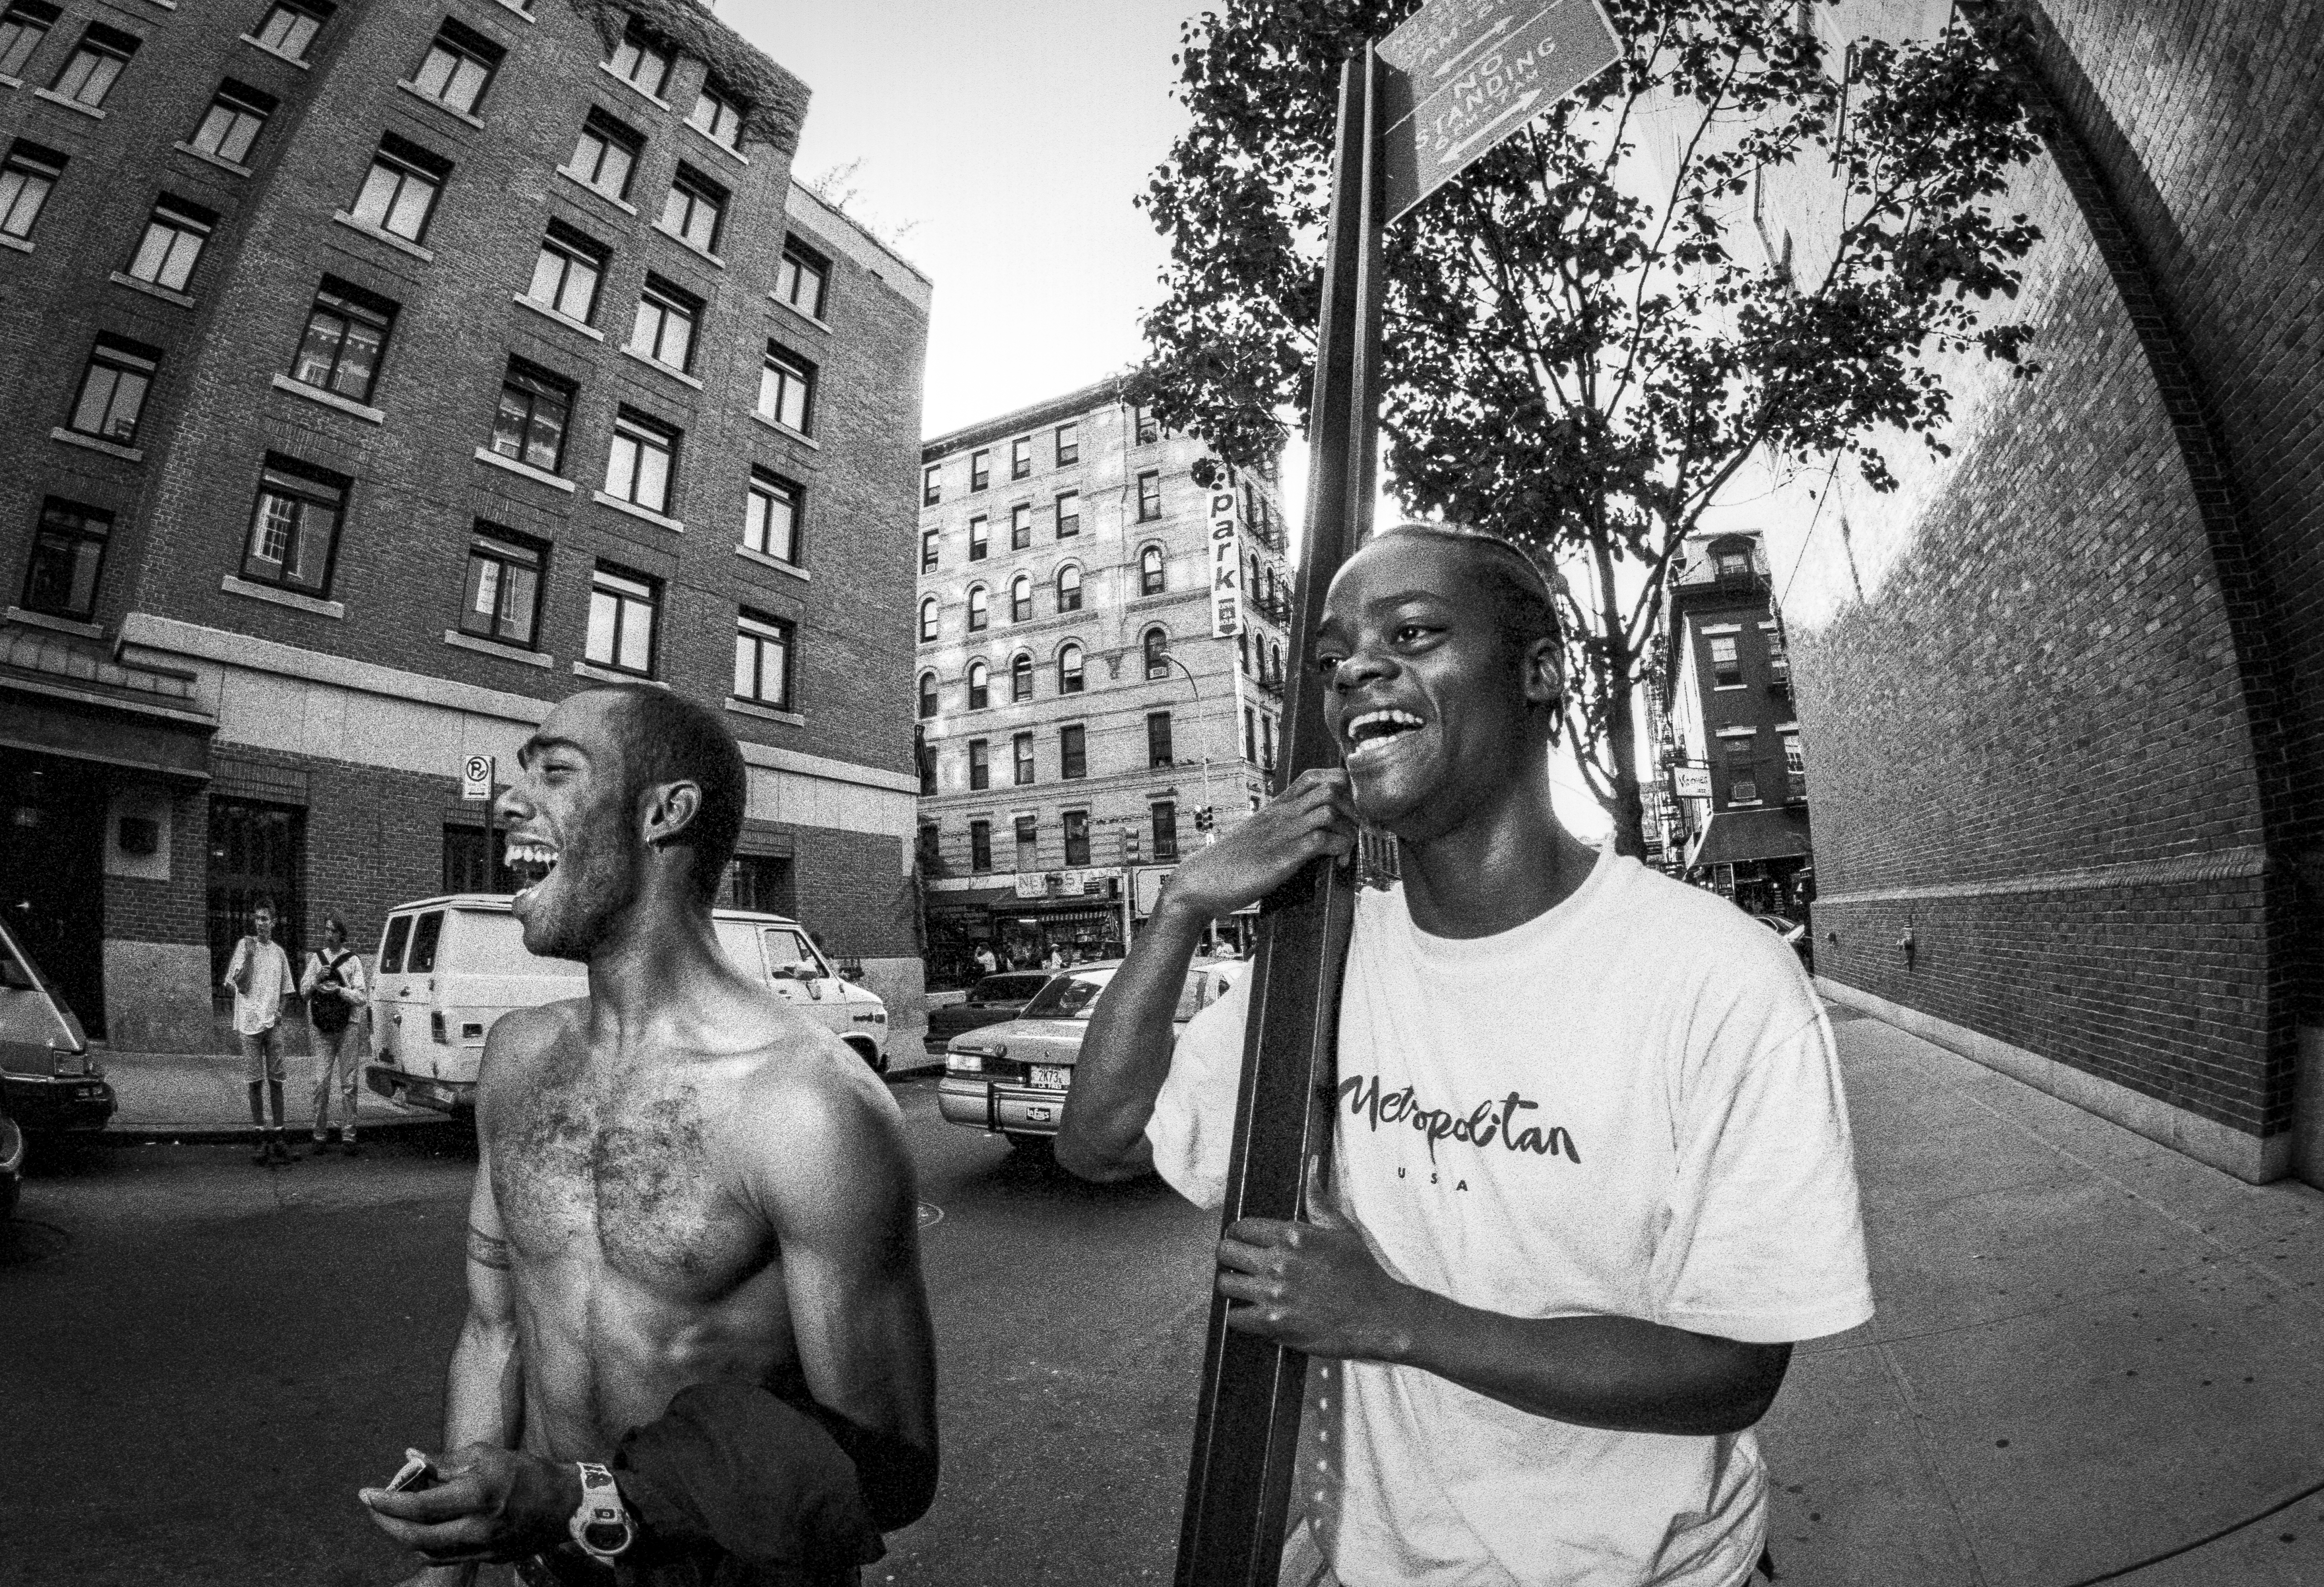 Mike Hernandez and Harold Hunter in 'All the Streets Are Silent' (Gunars Elmuts)